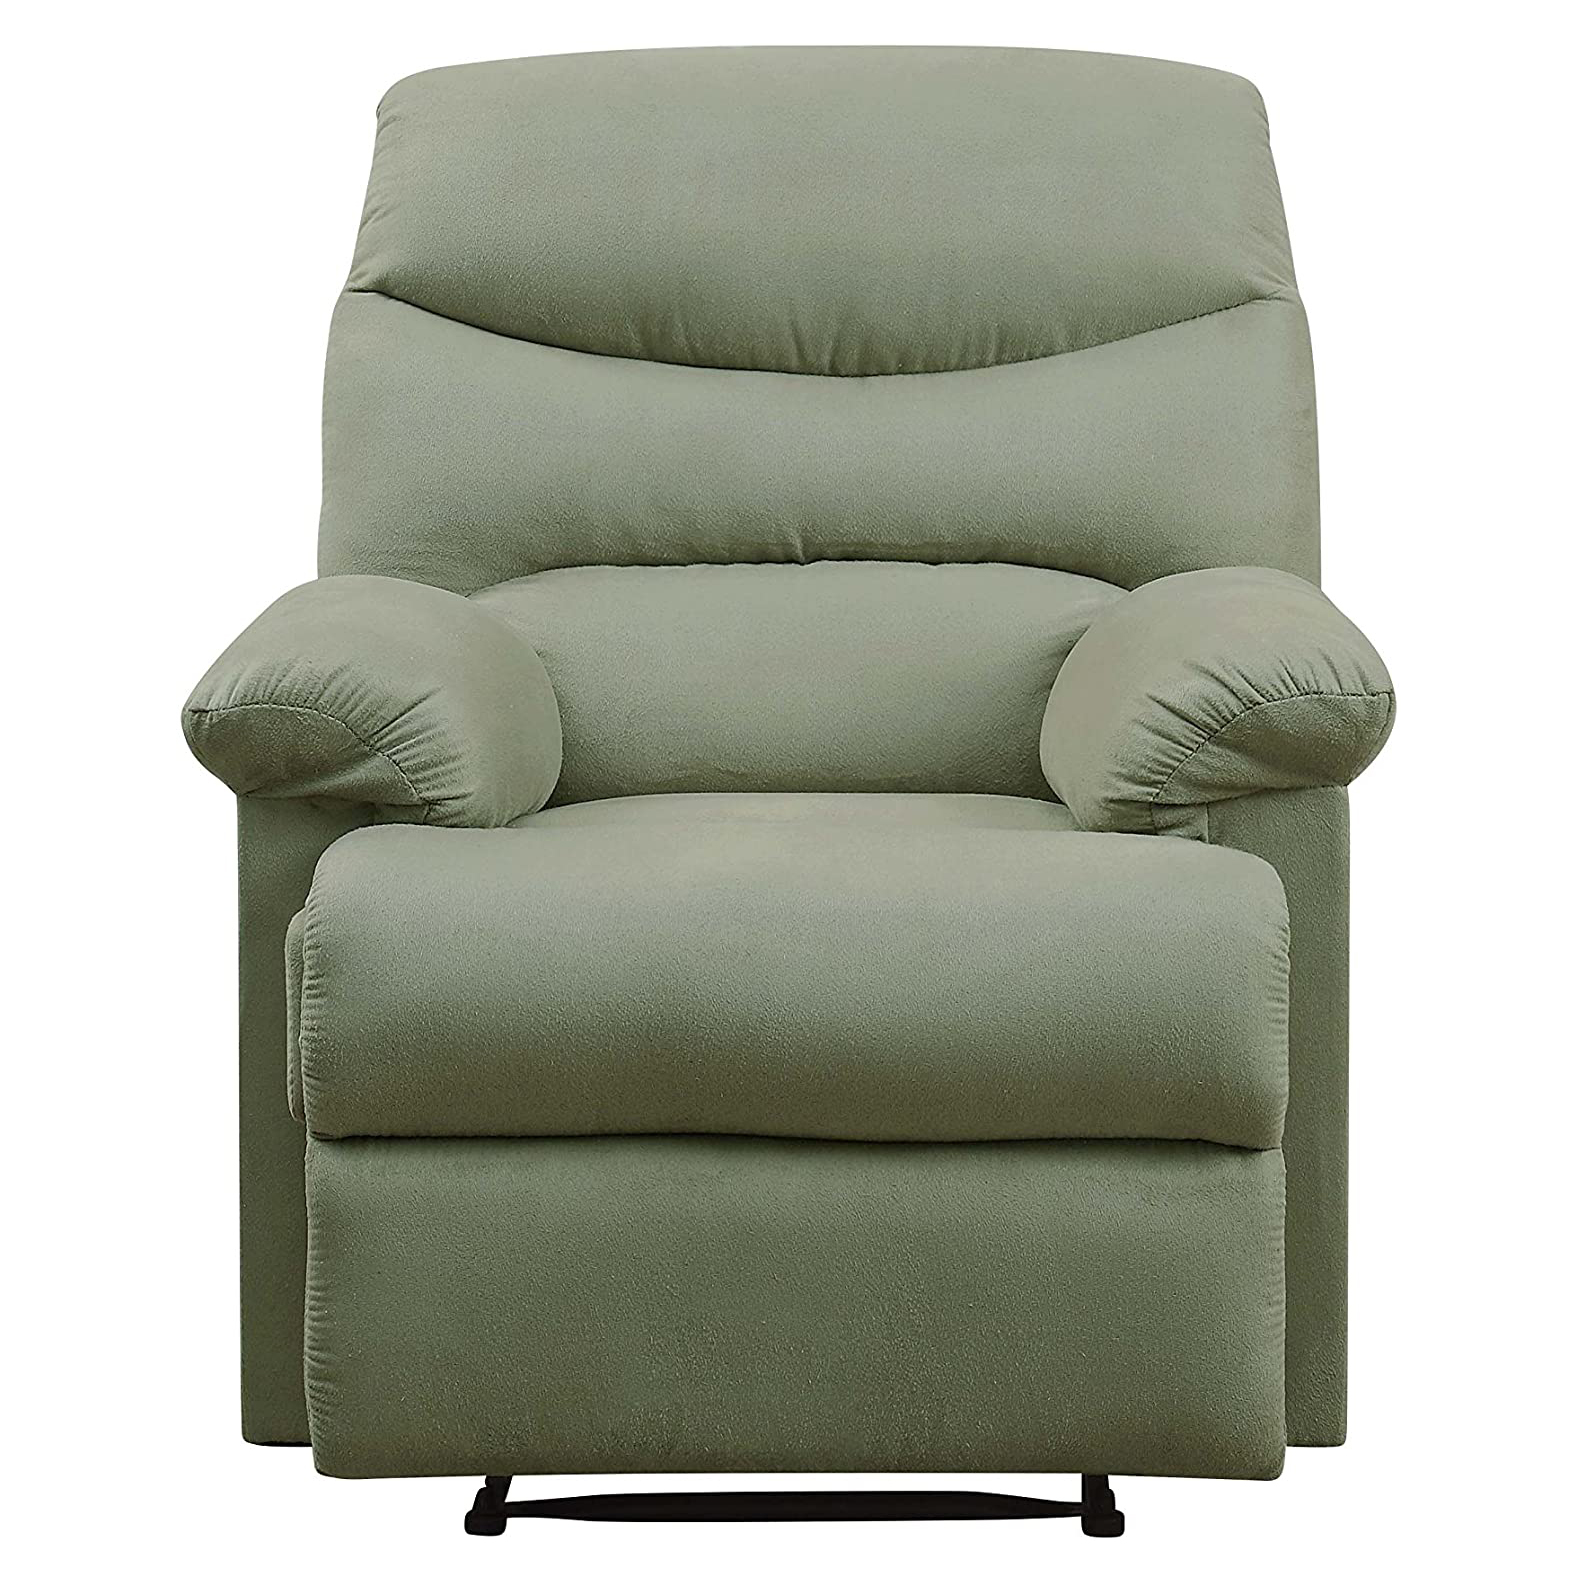 ACME Arcadia Smooth Microfiber Recliner Chair with External Handle, Sage Green - image 1 of 6